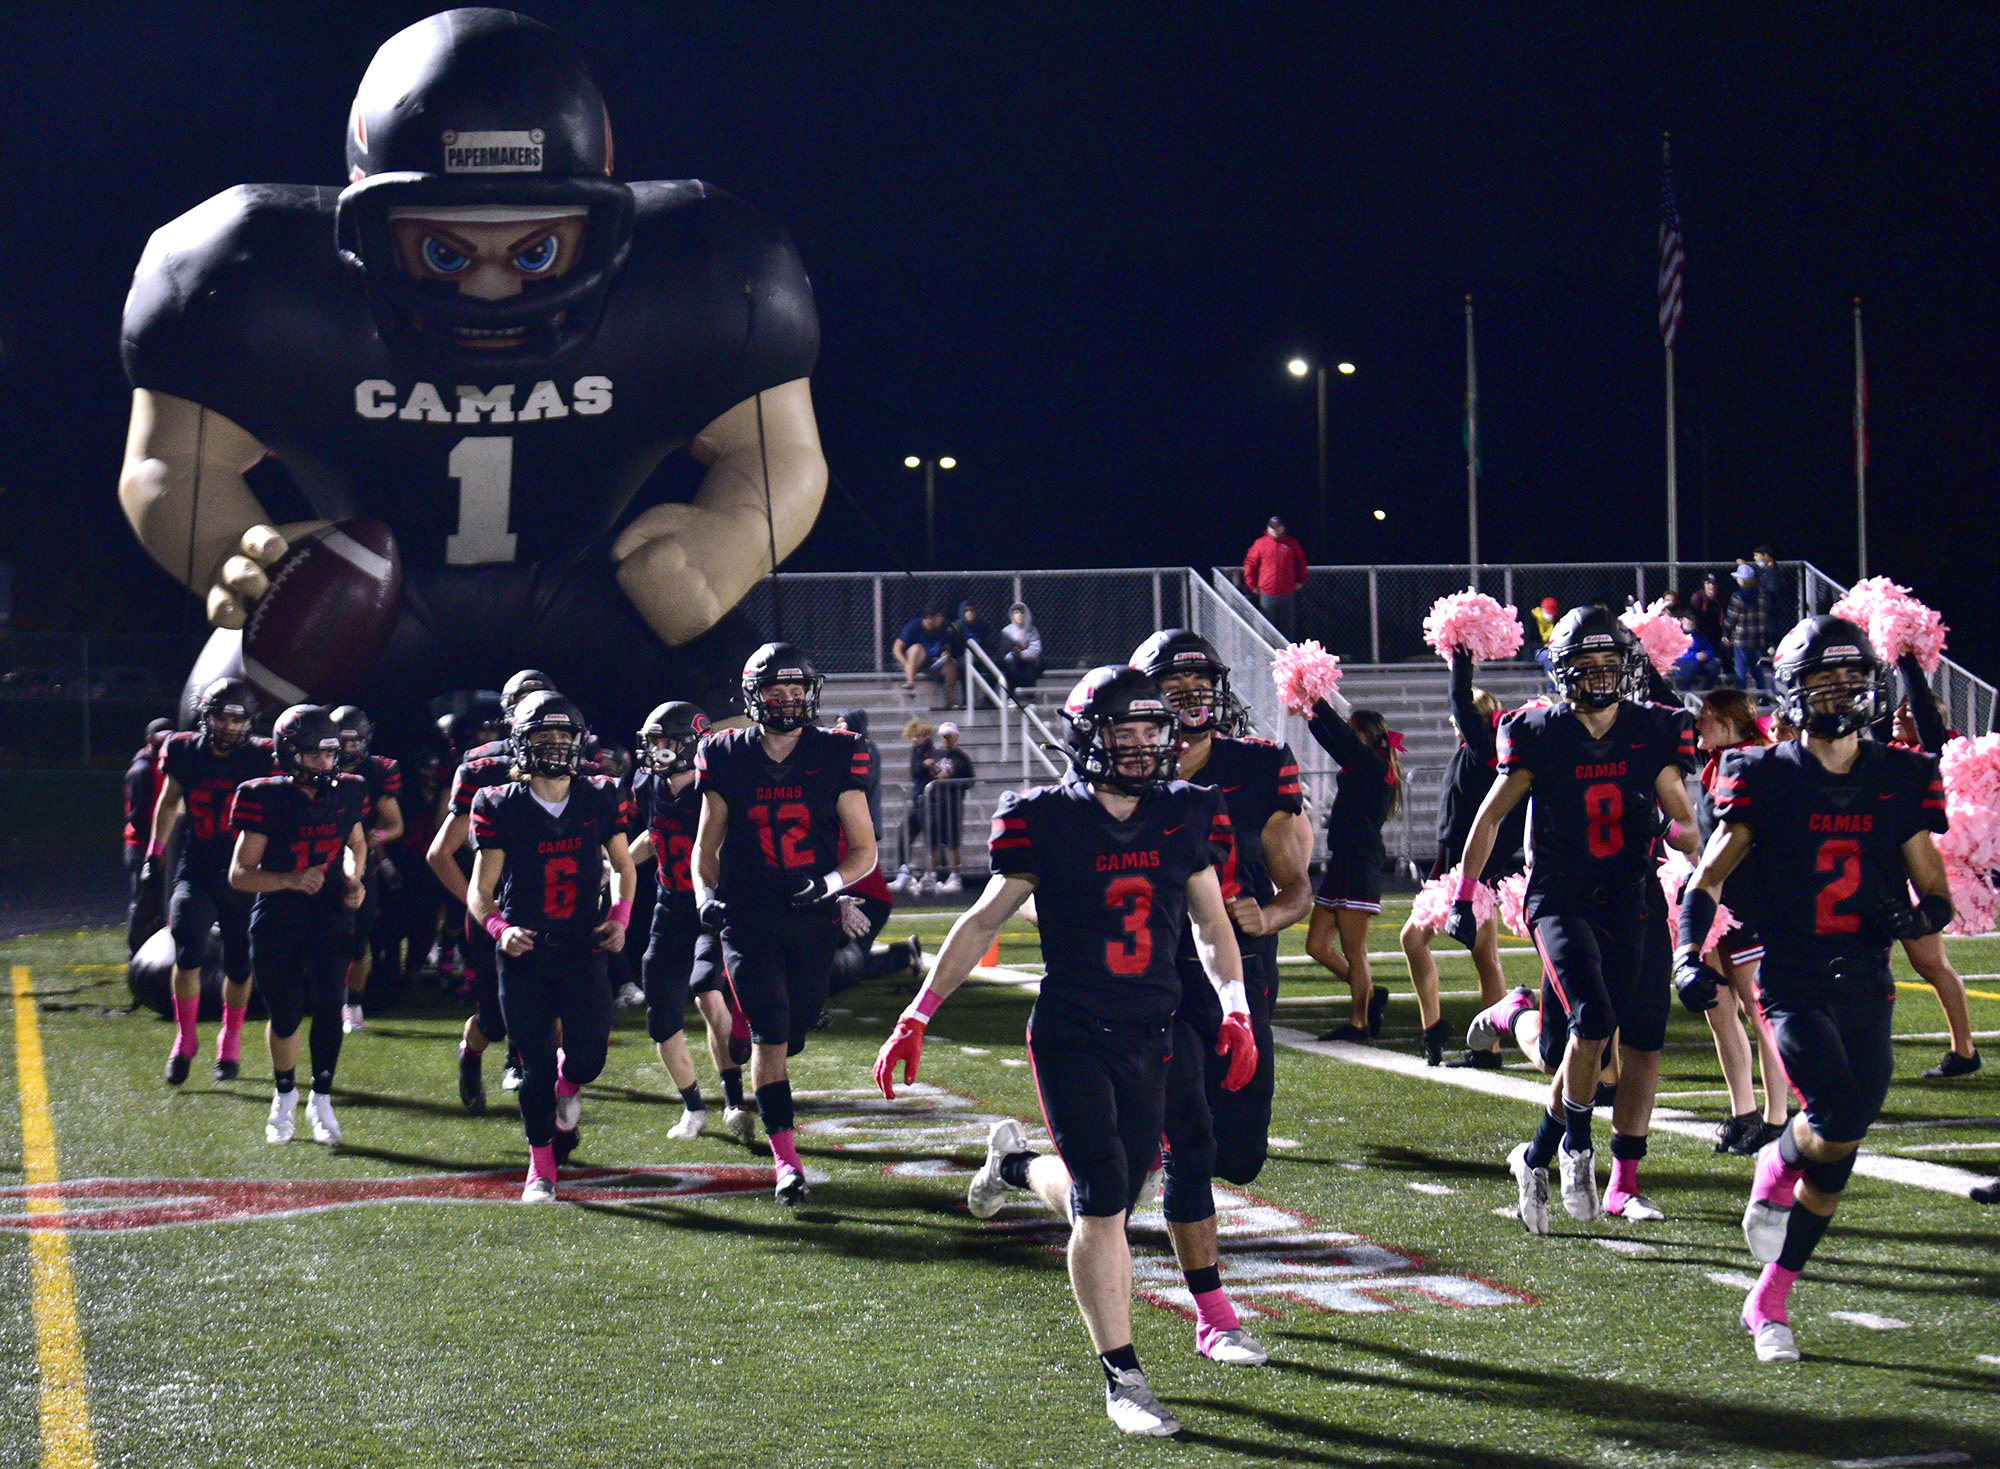 Camas High School football players run onto the field Friday, Oct. 22, 2021, before a game between the Papermakers and Skyview at Camas High School.